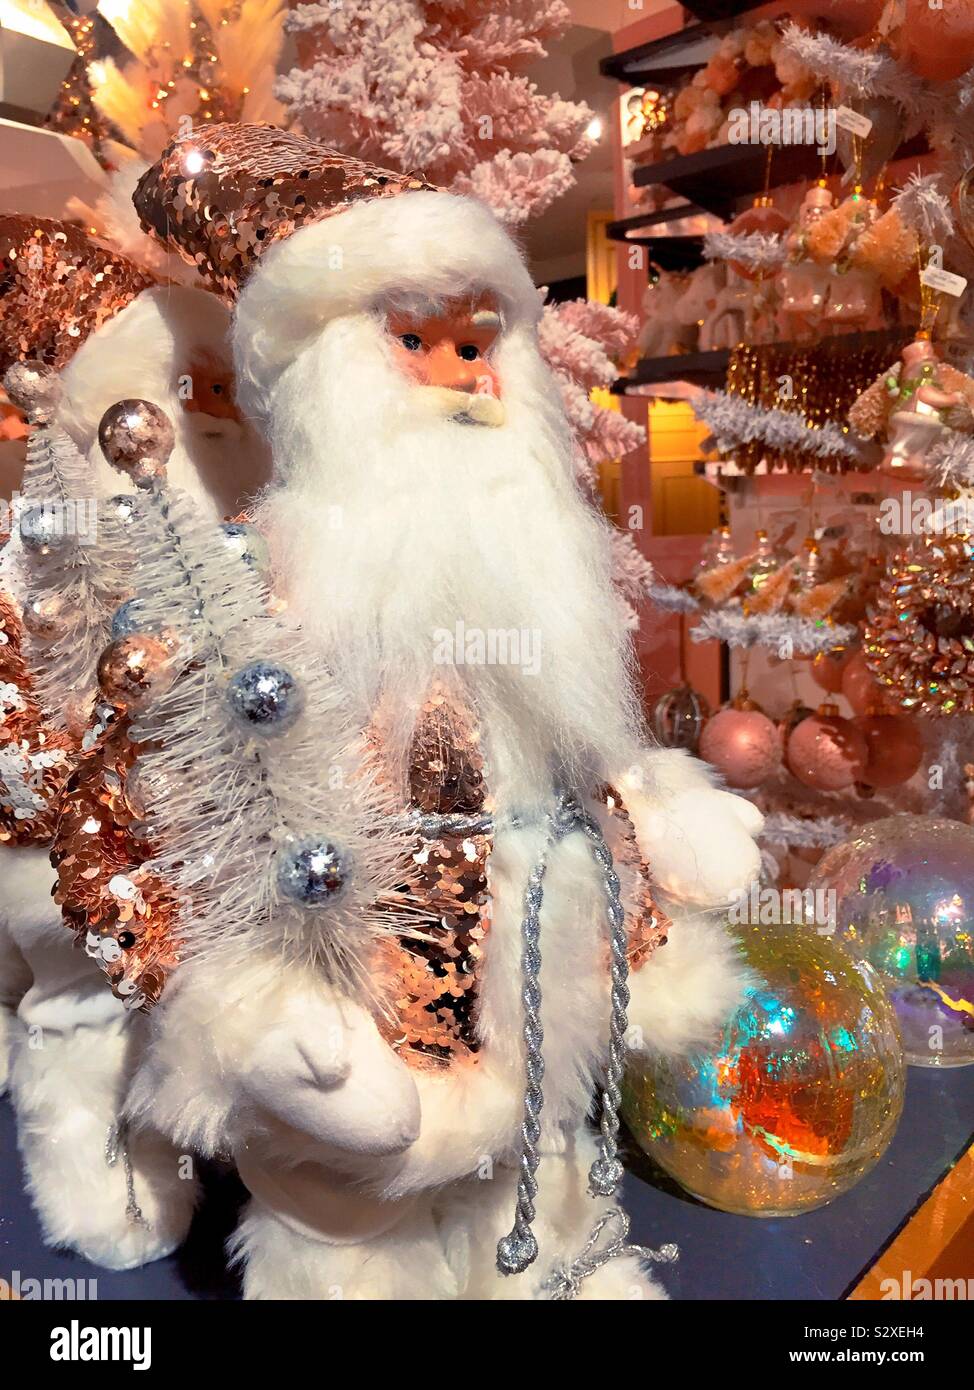 Macy’s holiday Lane features elaborate Christmas ornaments in Santa Claus figurines, New York City, USA Stock Photo